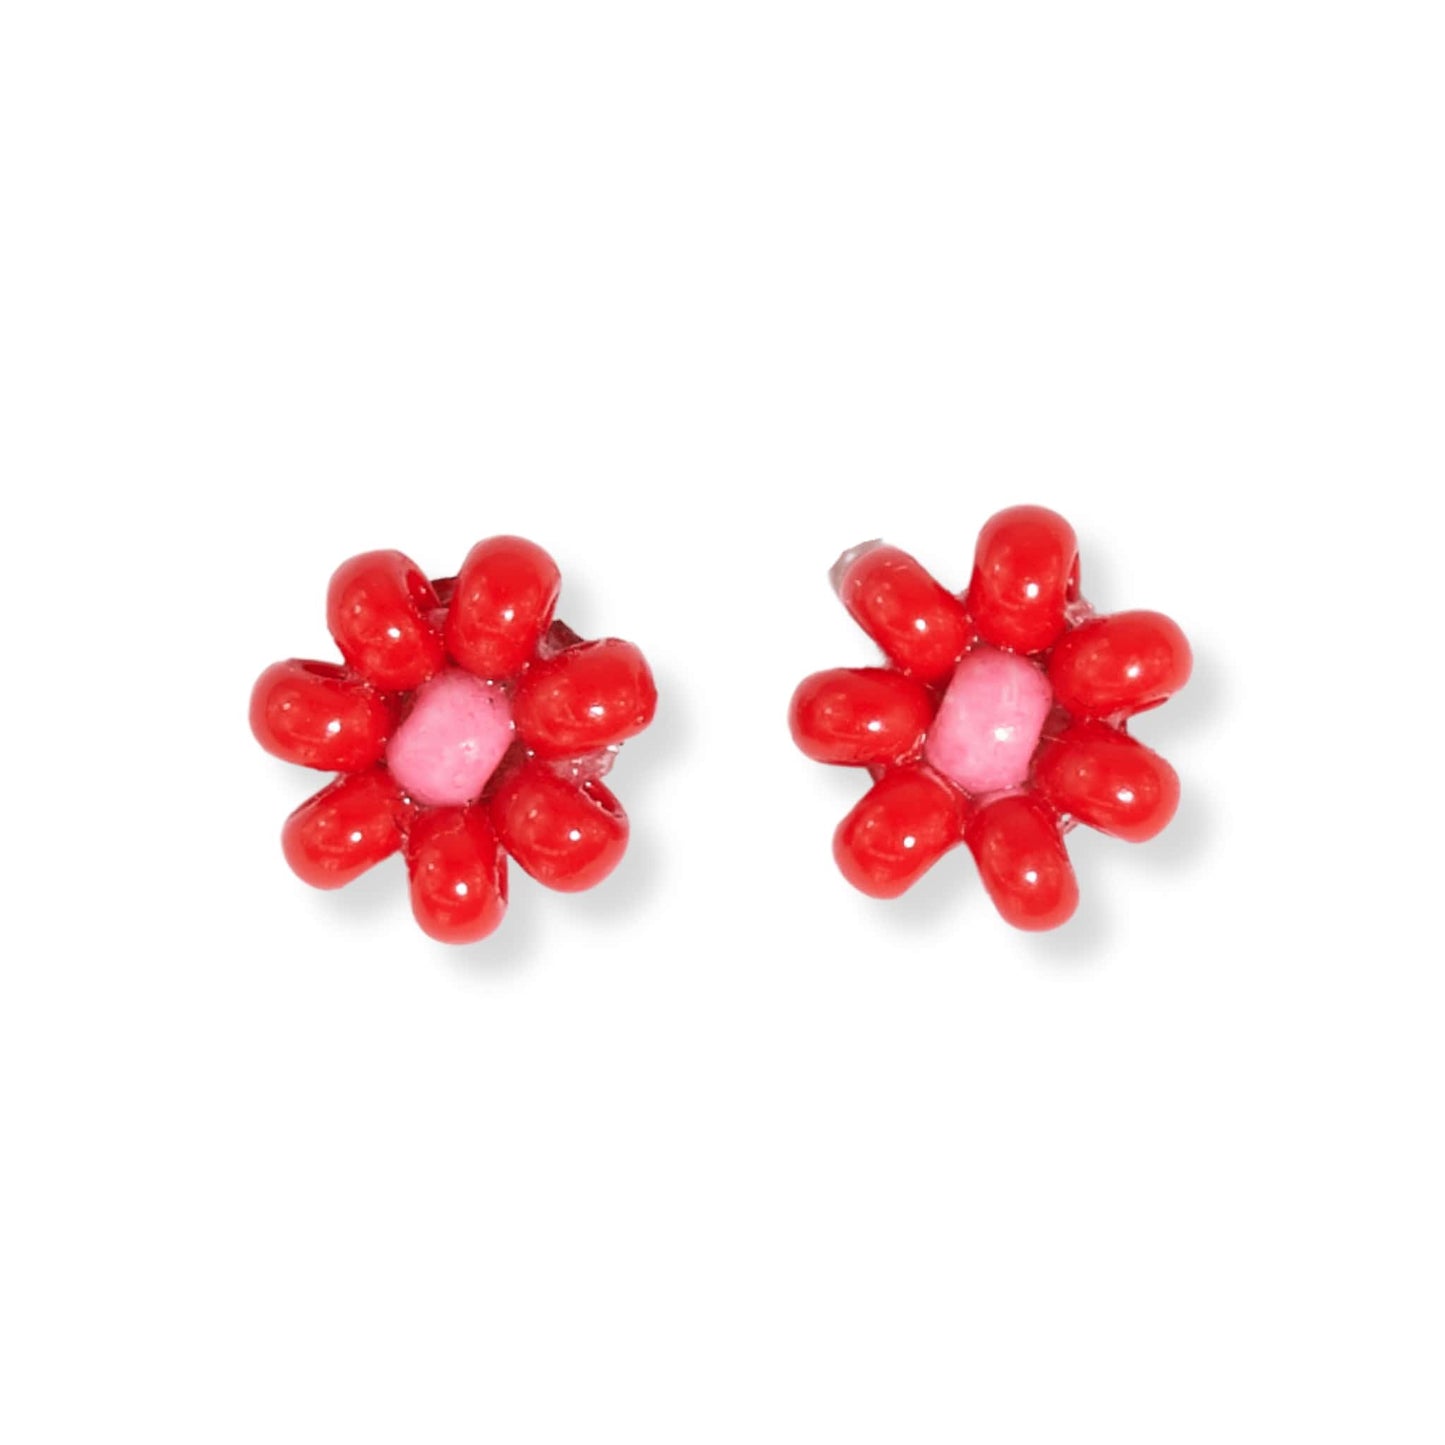 Tina Two Color Beaded Post Earrings Tomato Red Earrings